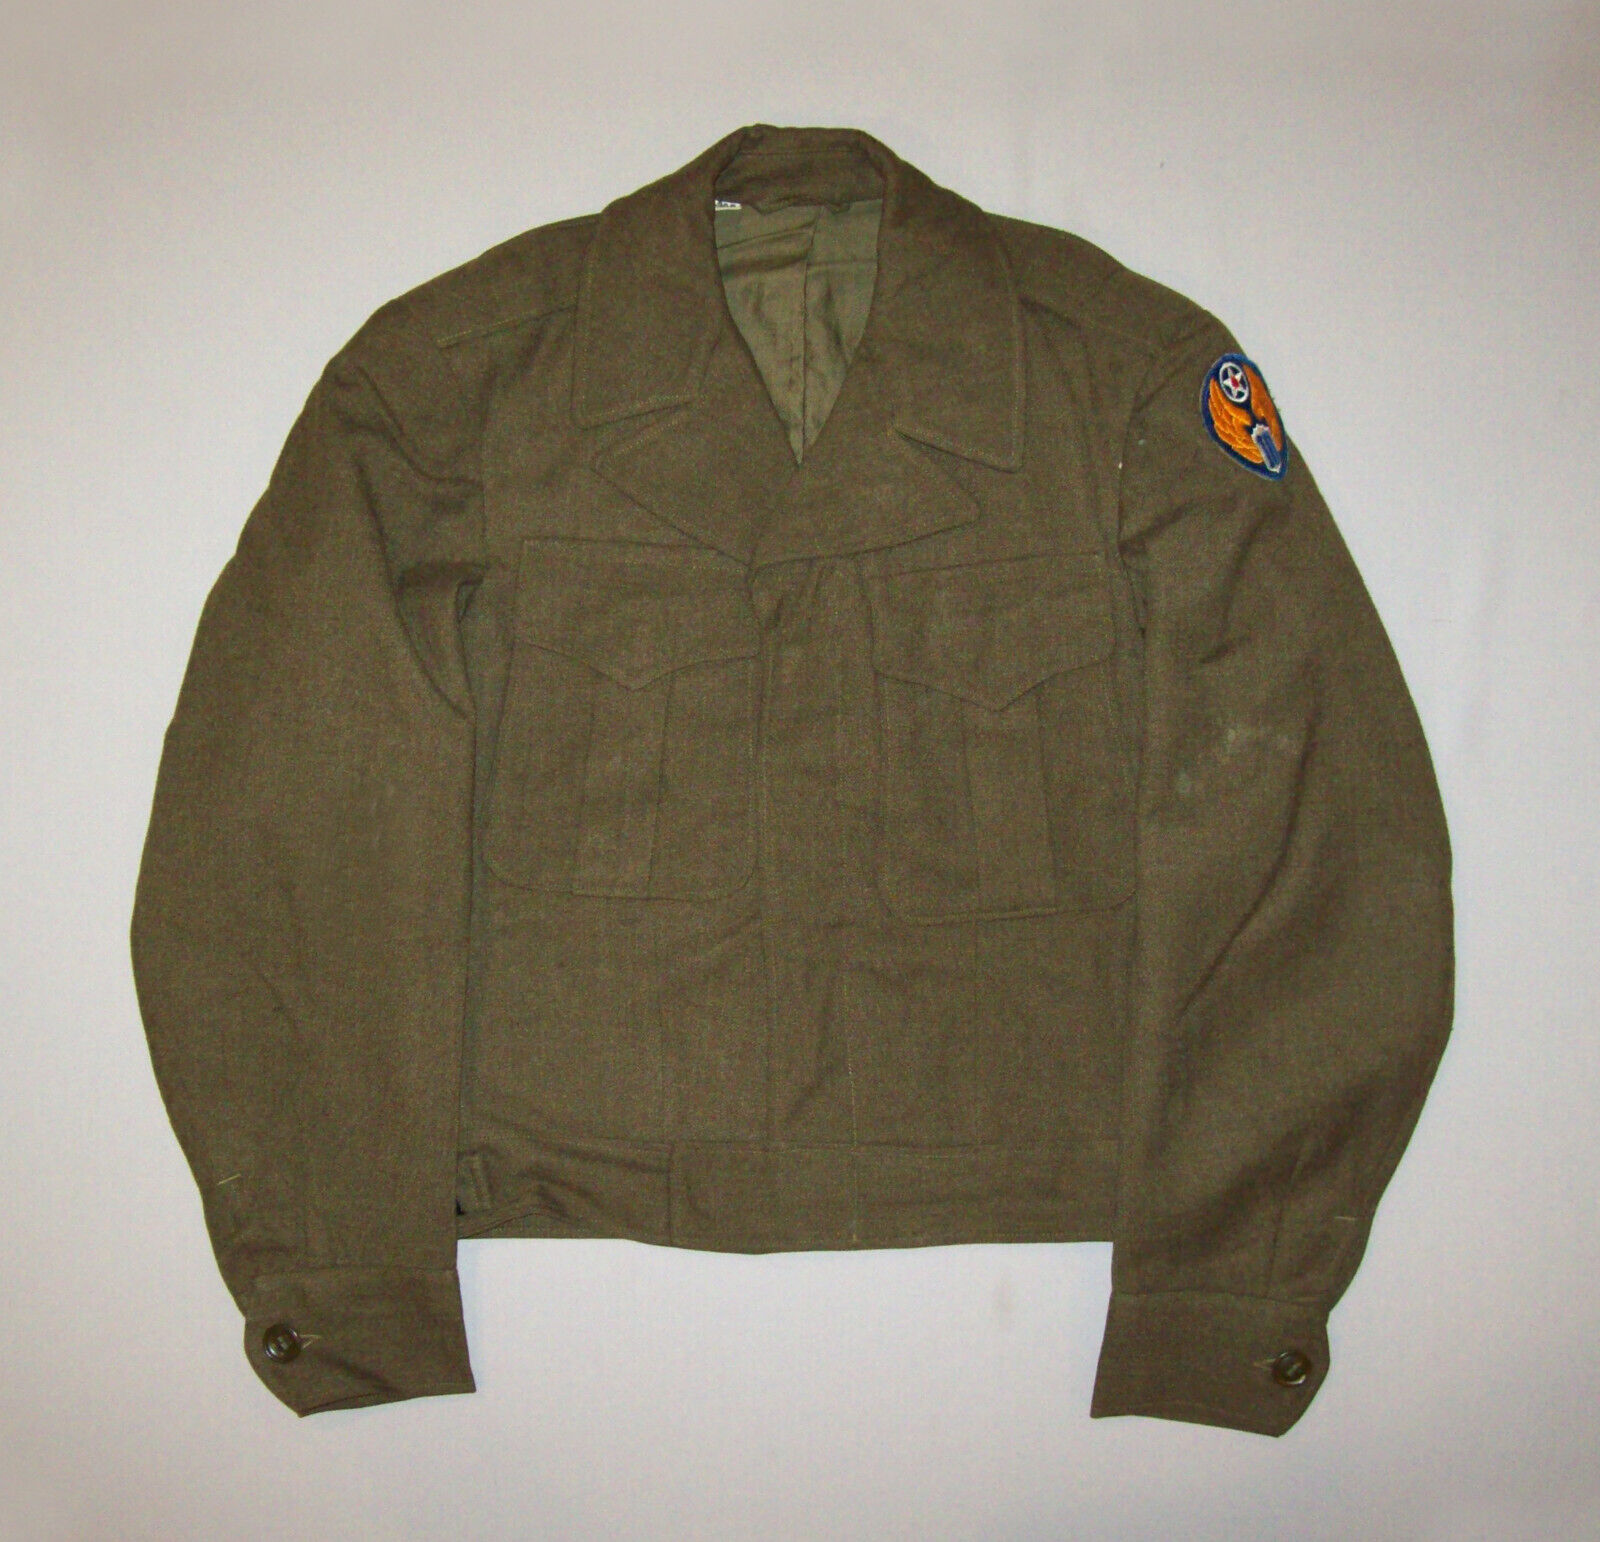 Scarce Old Vtg WWII 1940s Ike Uniform Jacket 10th AAF US Army Air Force W/ Patch